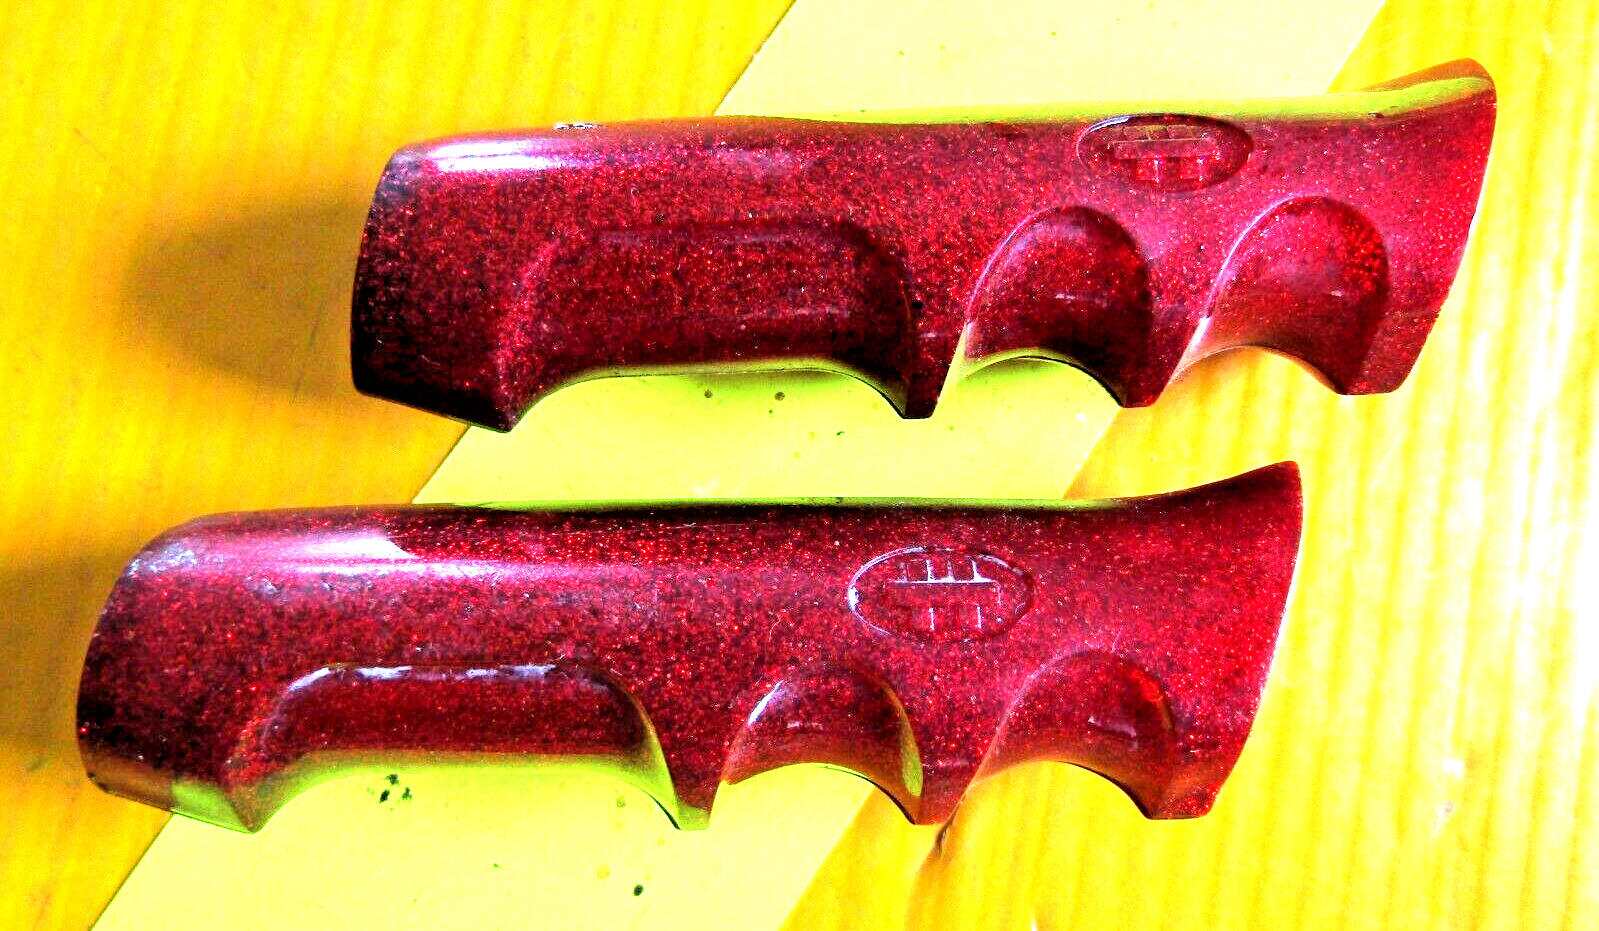 USED OLD PAIR HUFFY BICYCLE RED SPARKLE HAND GRIPS